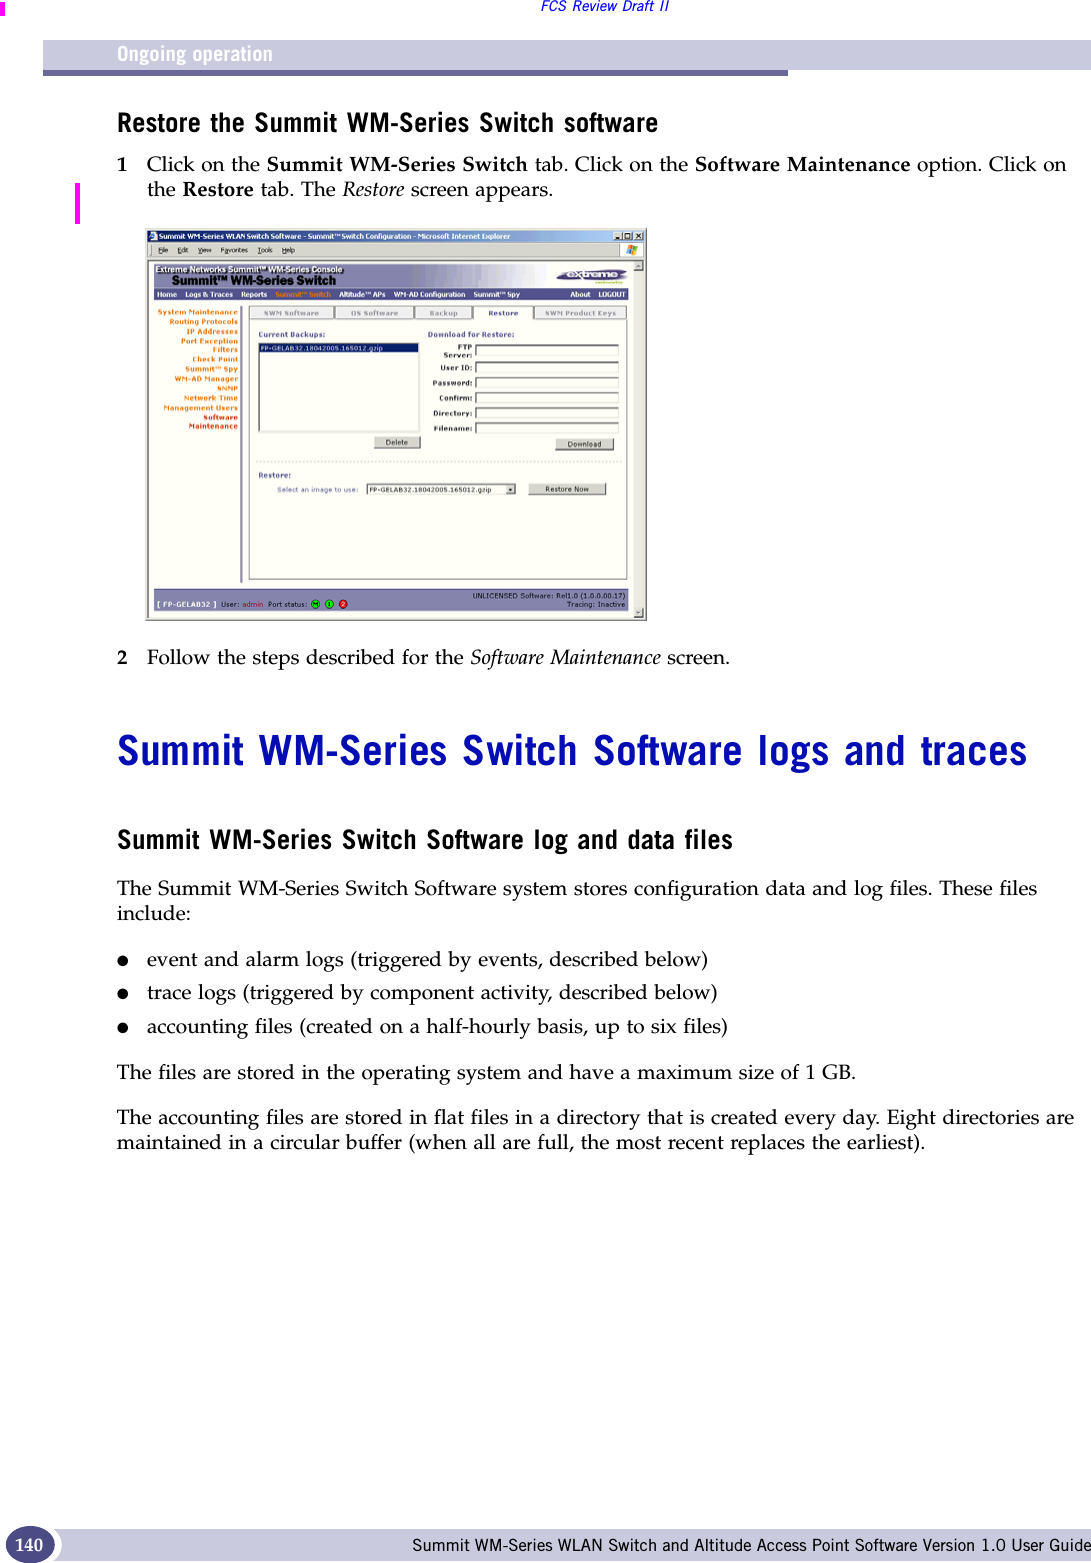 Ongoing operationFCS Review Draft IISummit WM-Series WLAN Switch and Altitude Access Point Software Version 1.0 User Guide140Restore the Summit WM-Series Switch software1Click on the Summit WM-Series Switch tab. Click on the Software Maintenance option. Click on the Restore tab. The Restore screen appears.2Follow the steps described for the Software Maintenance screen.Summit WM-Series Switch Software logs and tracesSummit WM-Series Switch Software log and data filesThe Summit WM-Series Switch Software system stores configuration data and log files. These files include:●event and alarm logs (triggered by events, described below)●trace logs (triggered by component activity, described below)●accounting files (created on a half-hourly basis, up to six files)The files are stored in the operating system and have a maximum size of 1 GB. The accounting files are stored in flat files in a directory that is created every day. Eight directories are maintained in a circular buffer (when all are full, the most recent replaces the earliest).